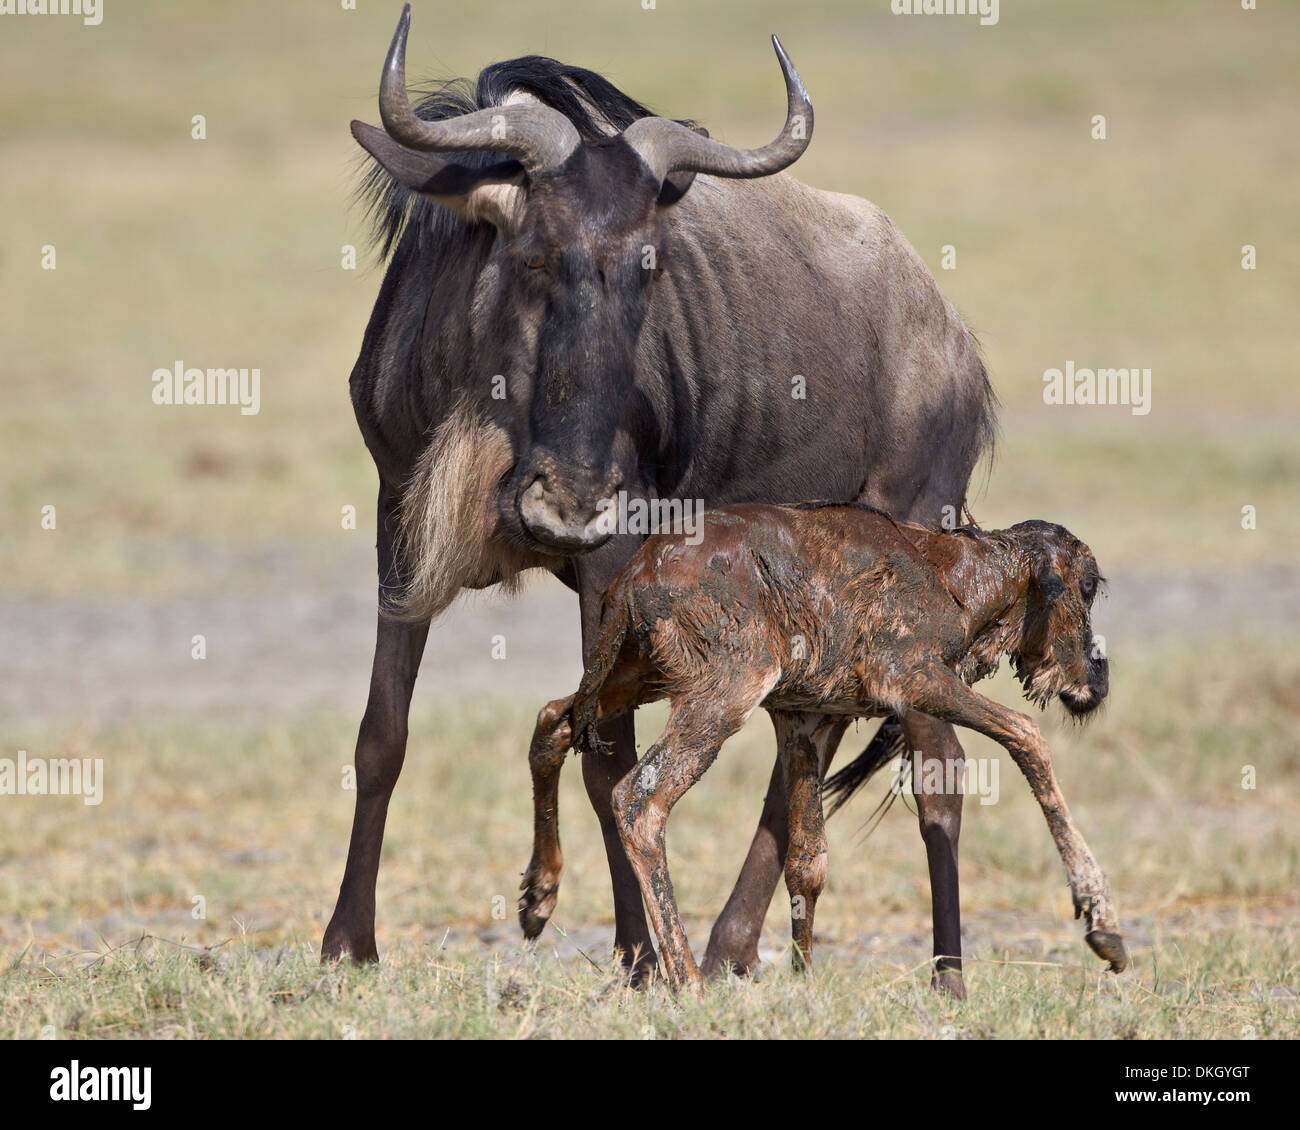 Just-born blue wildebeest (Connochaetes taurinus) standing for the first time, Serengeti National Park, Tanzania, Africa Stock Photo